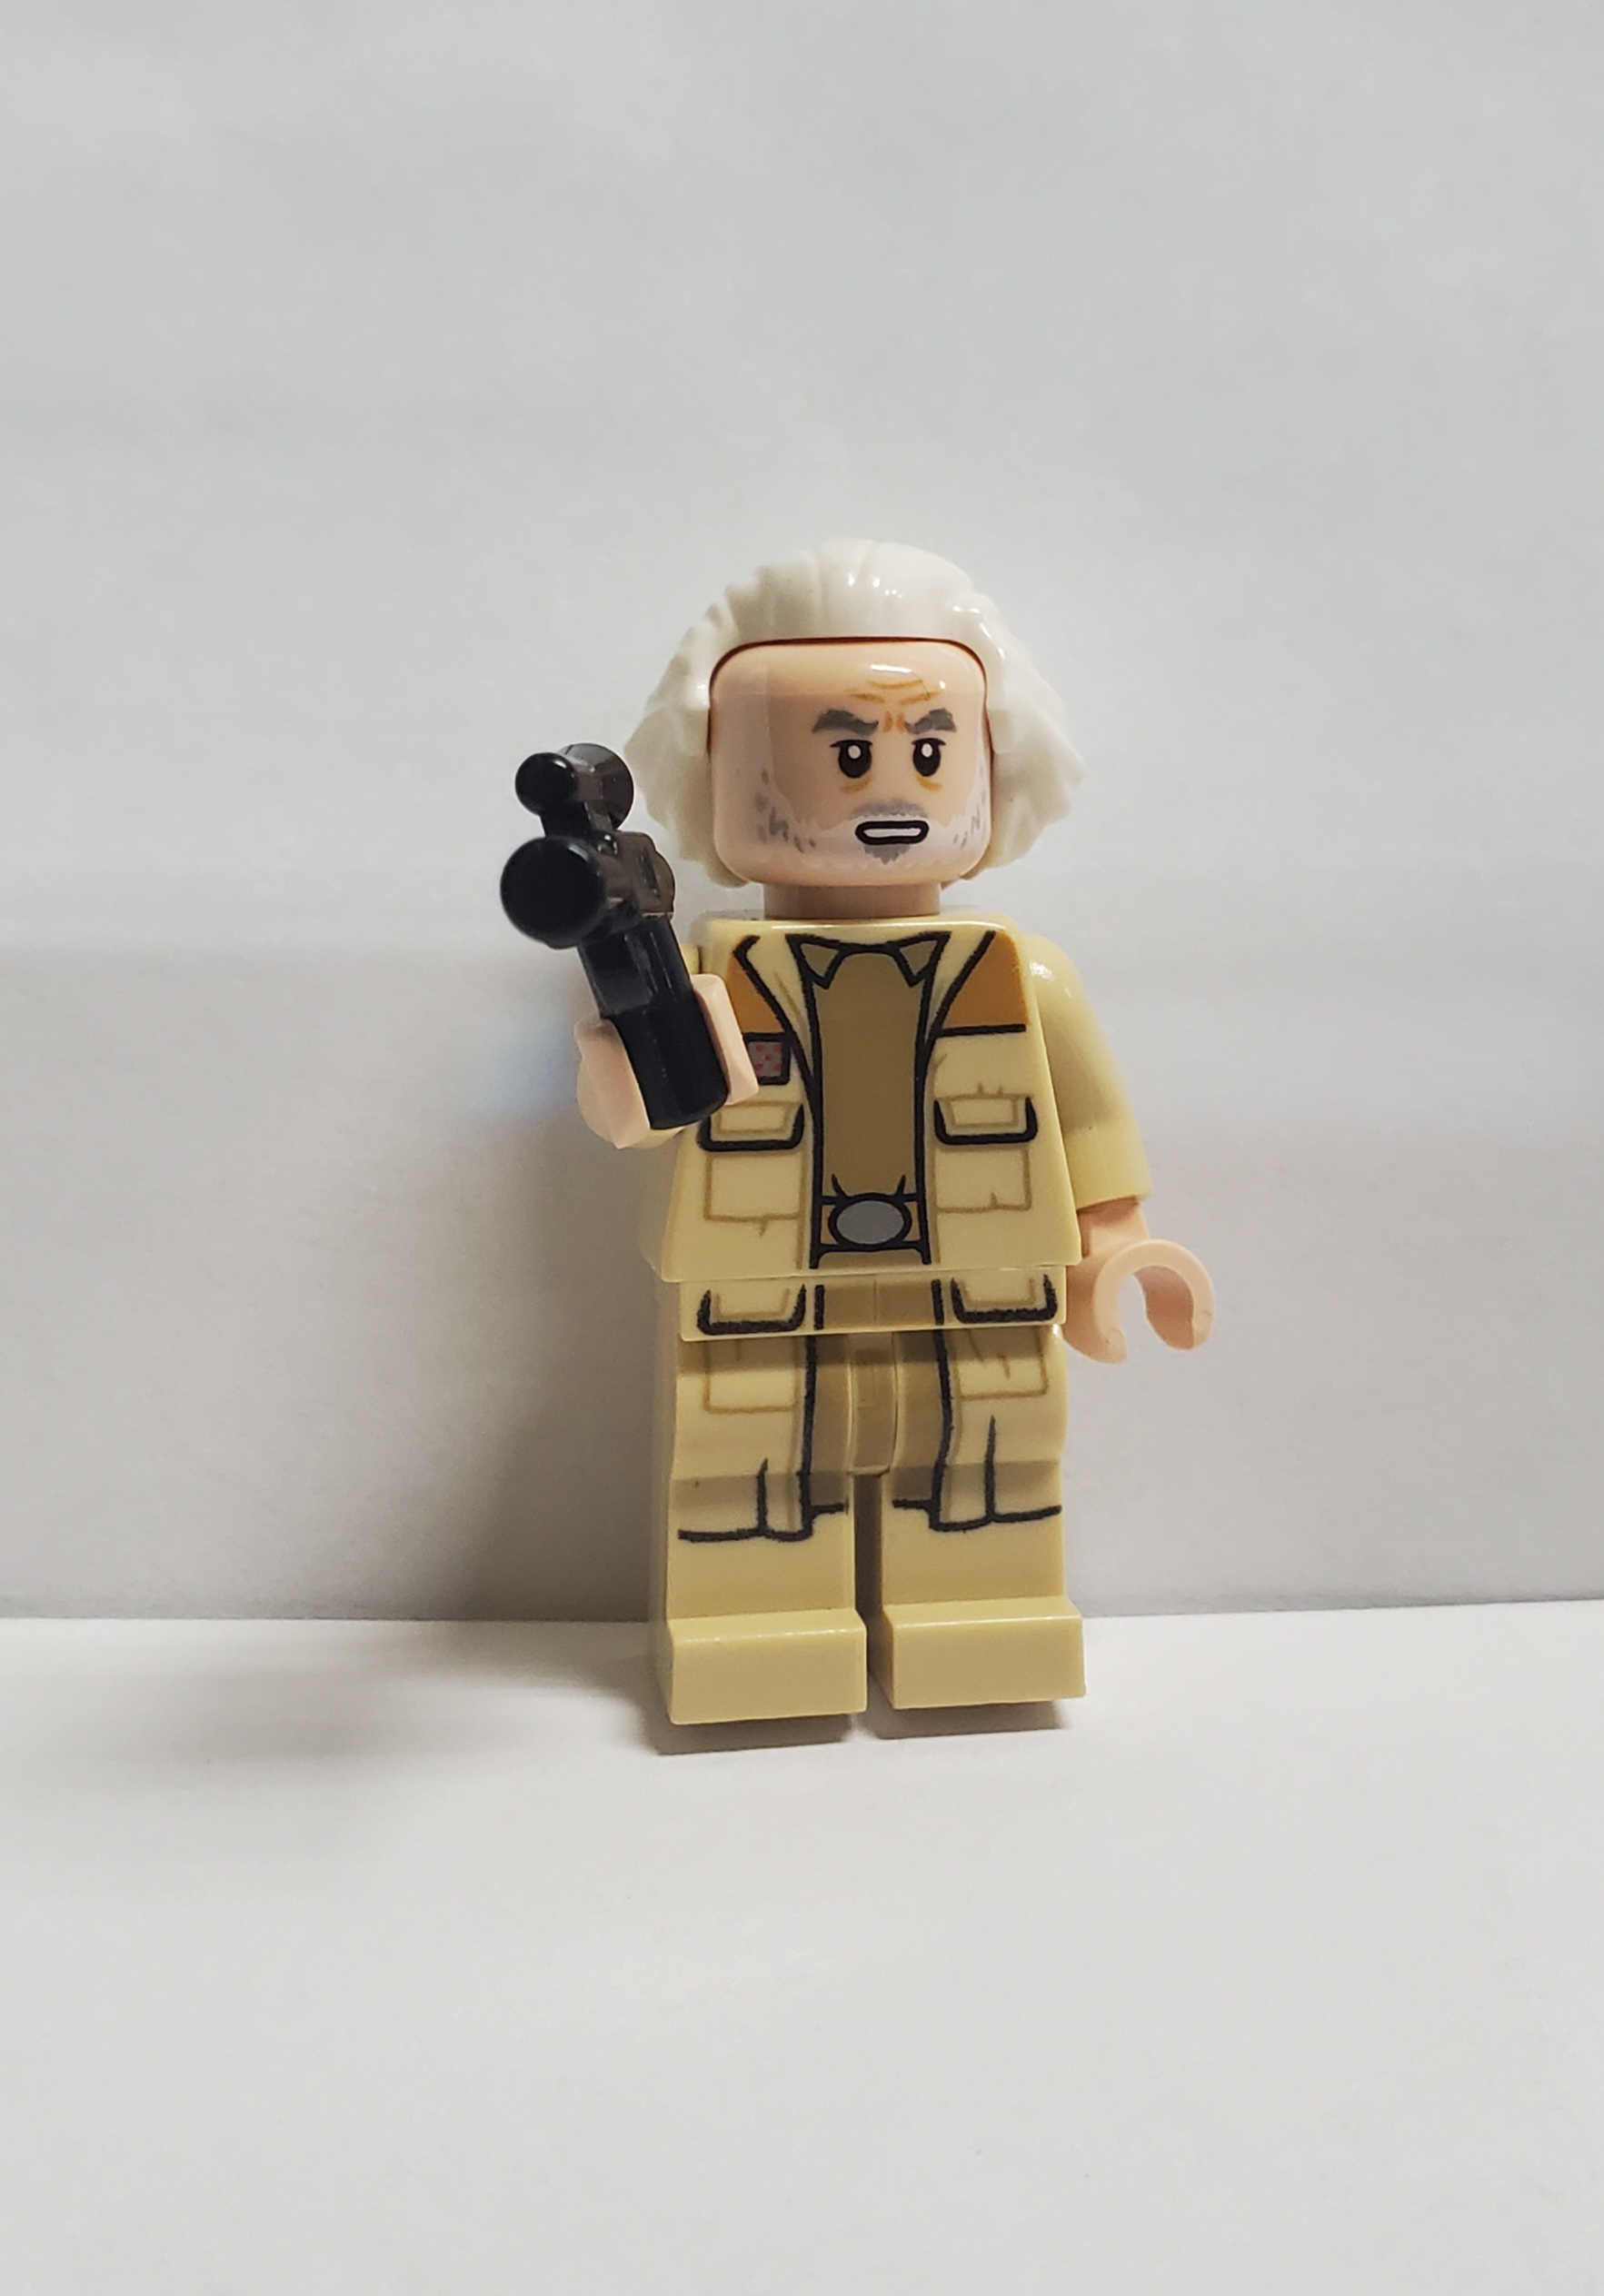 Lego Star Wars General Dodonna Minifigure Sw1140 Incomplete Pre-Owned